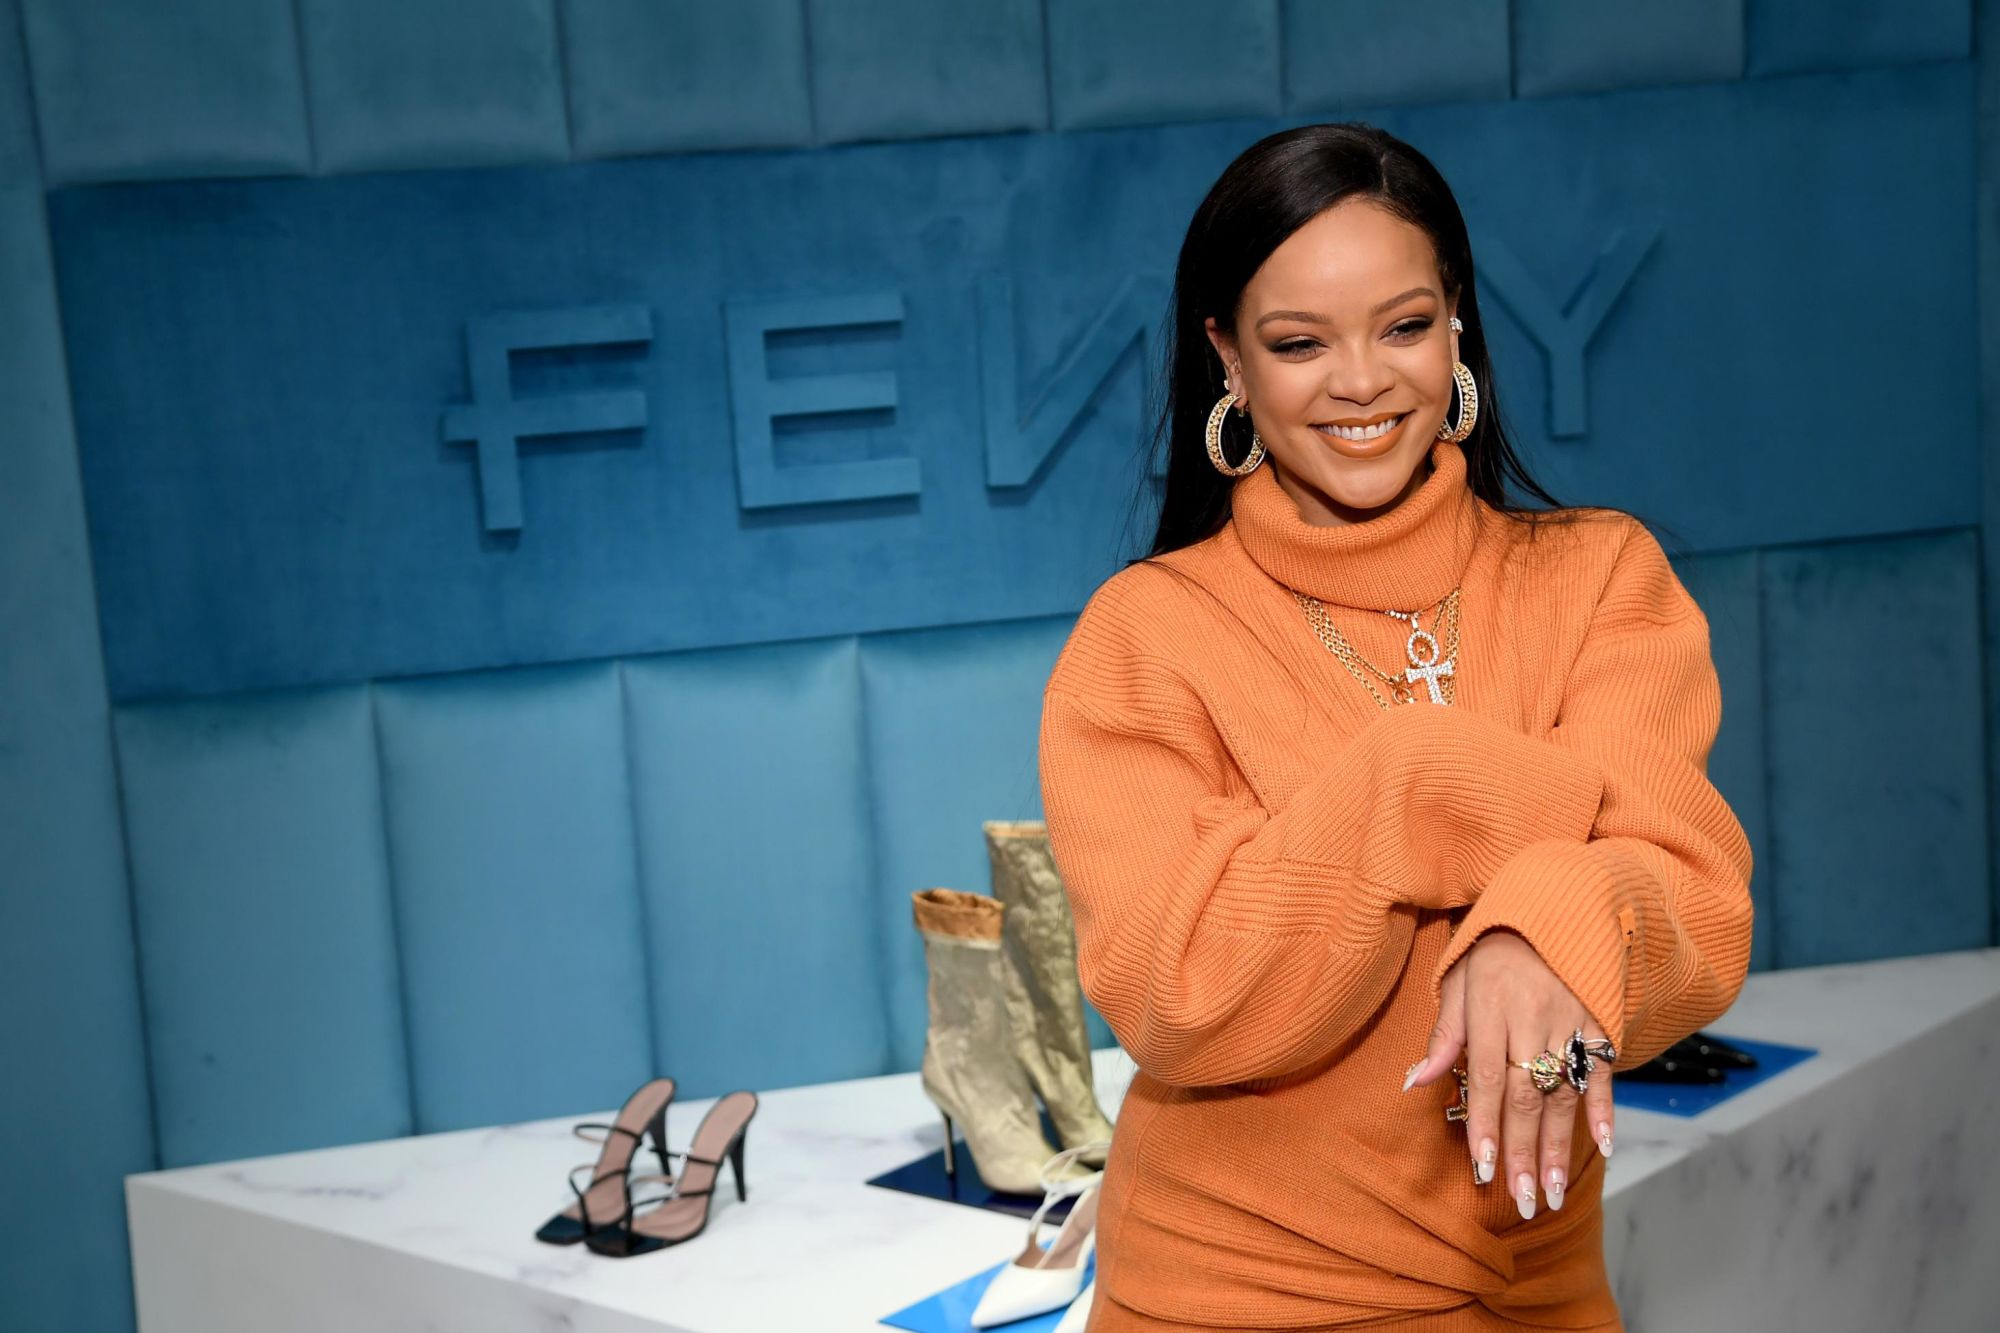 Everything you need to know about Rihanna's new clothing line